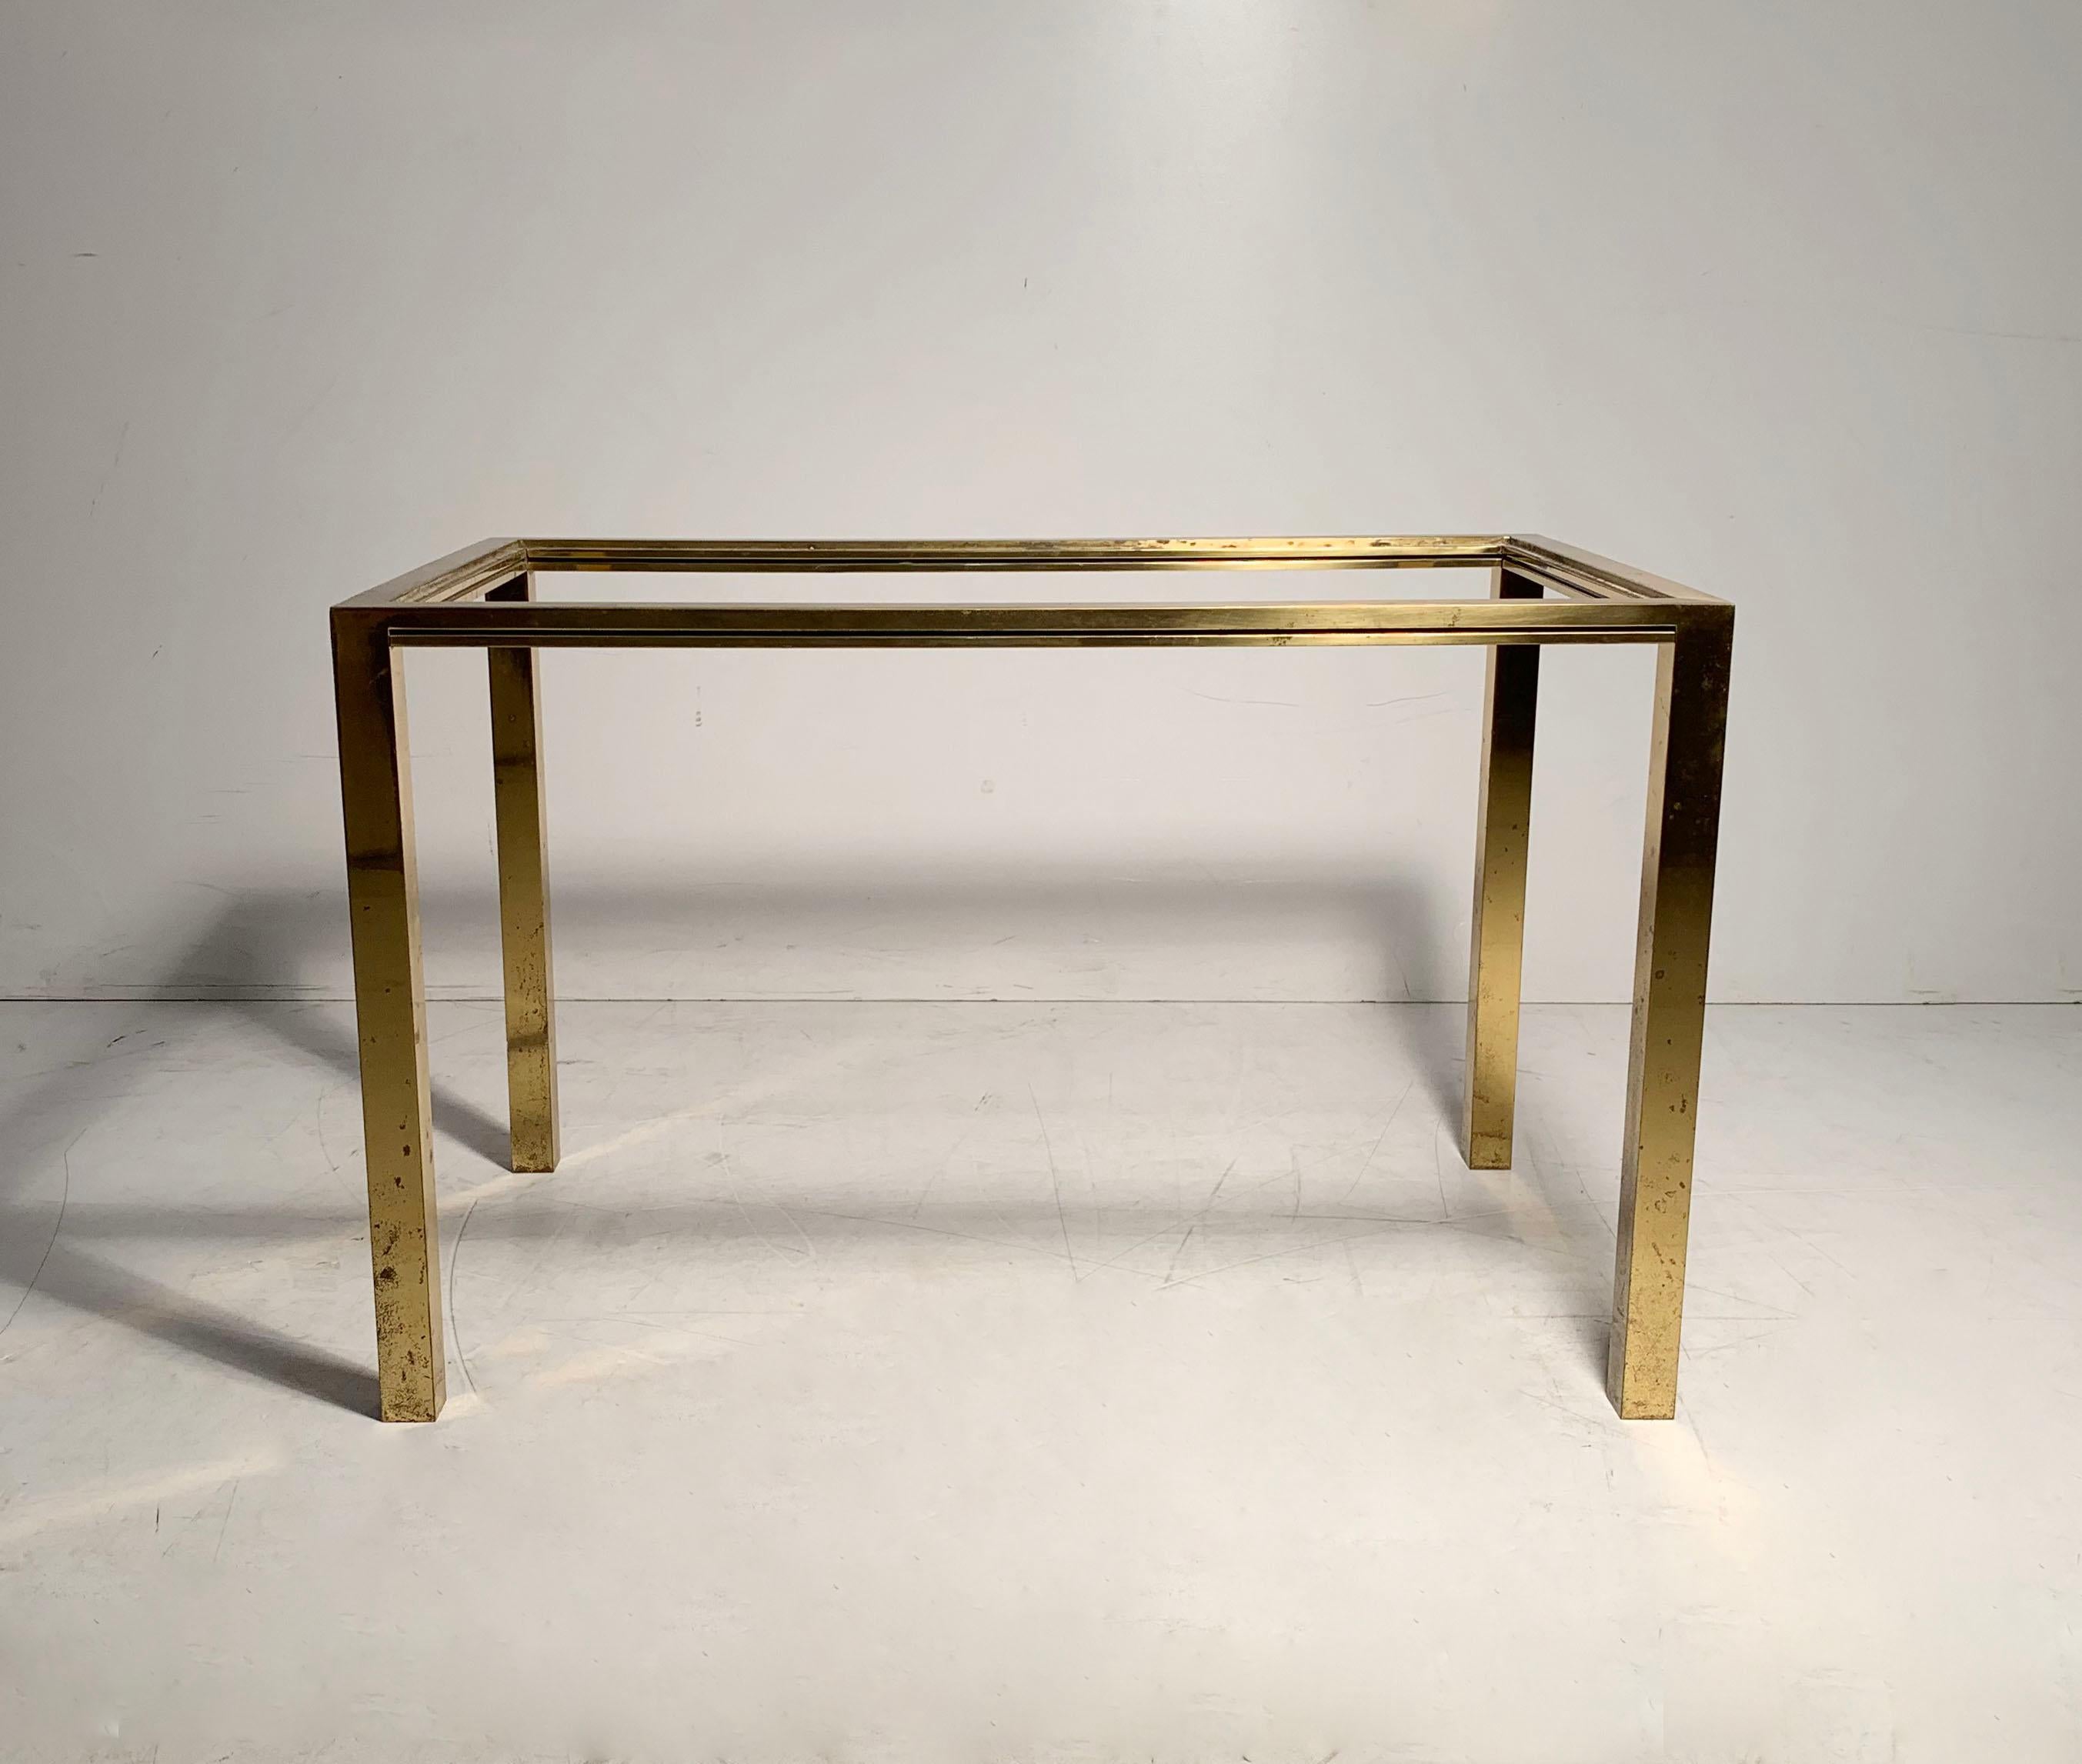 High quality vintage petite brass coffee table attributed to Jansen. Table has wear overall to the finish. A heavy weight piece that is structurally Sound. The brass section under the top frame are solid bar. In the manner of Milo Baughman